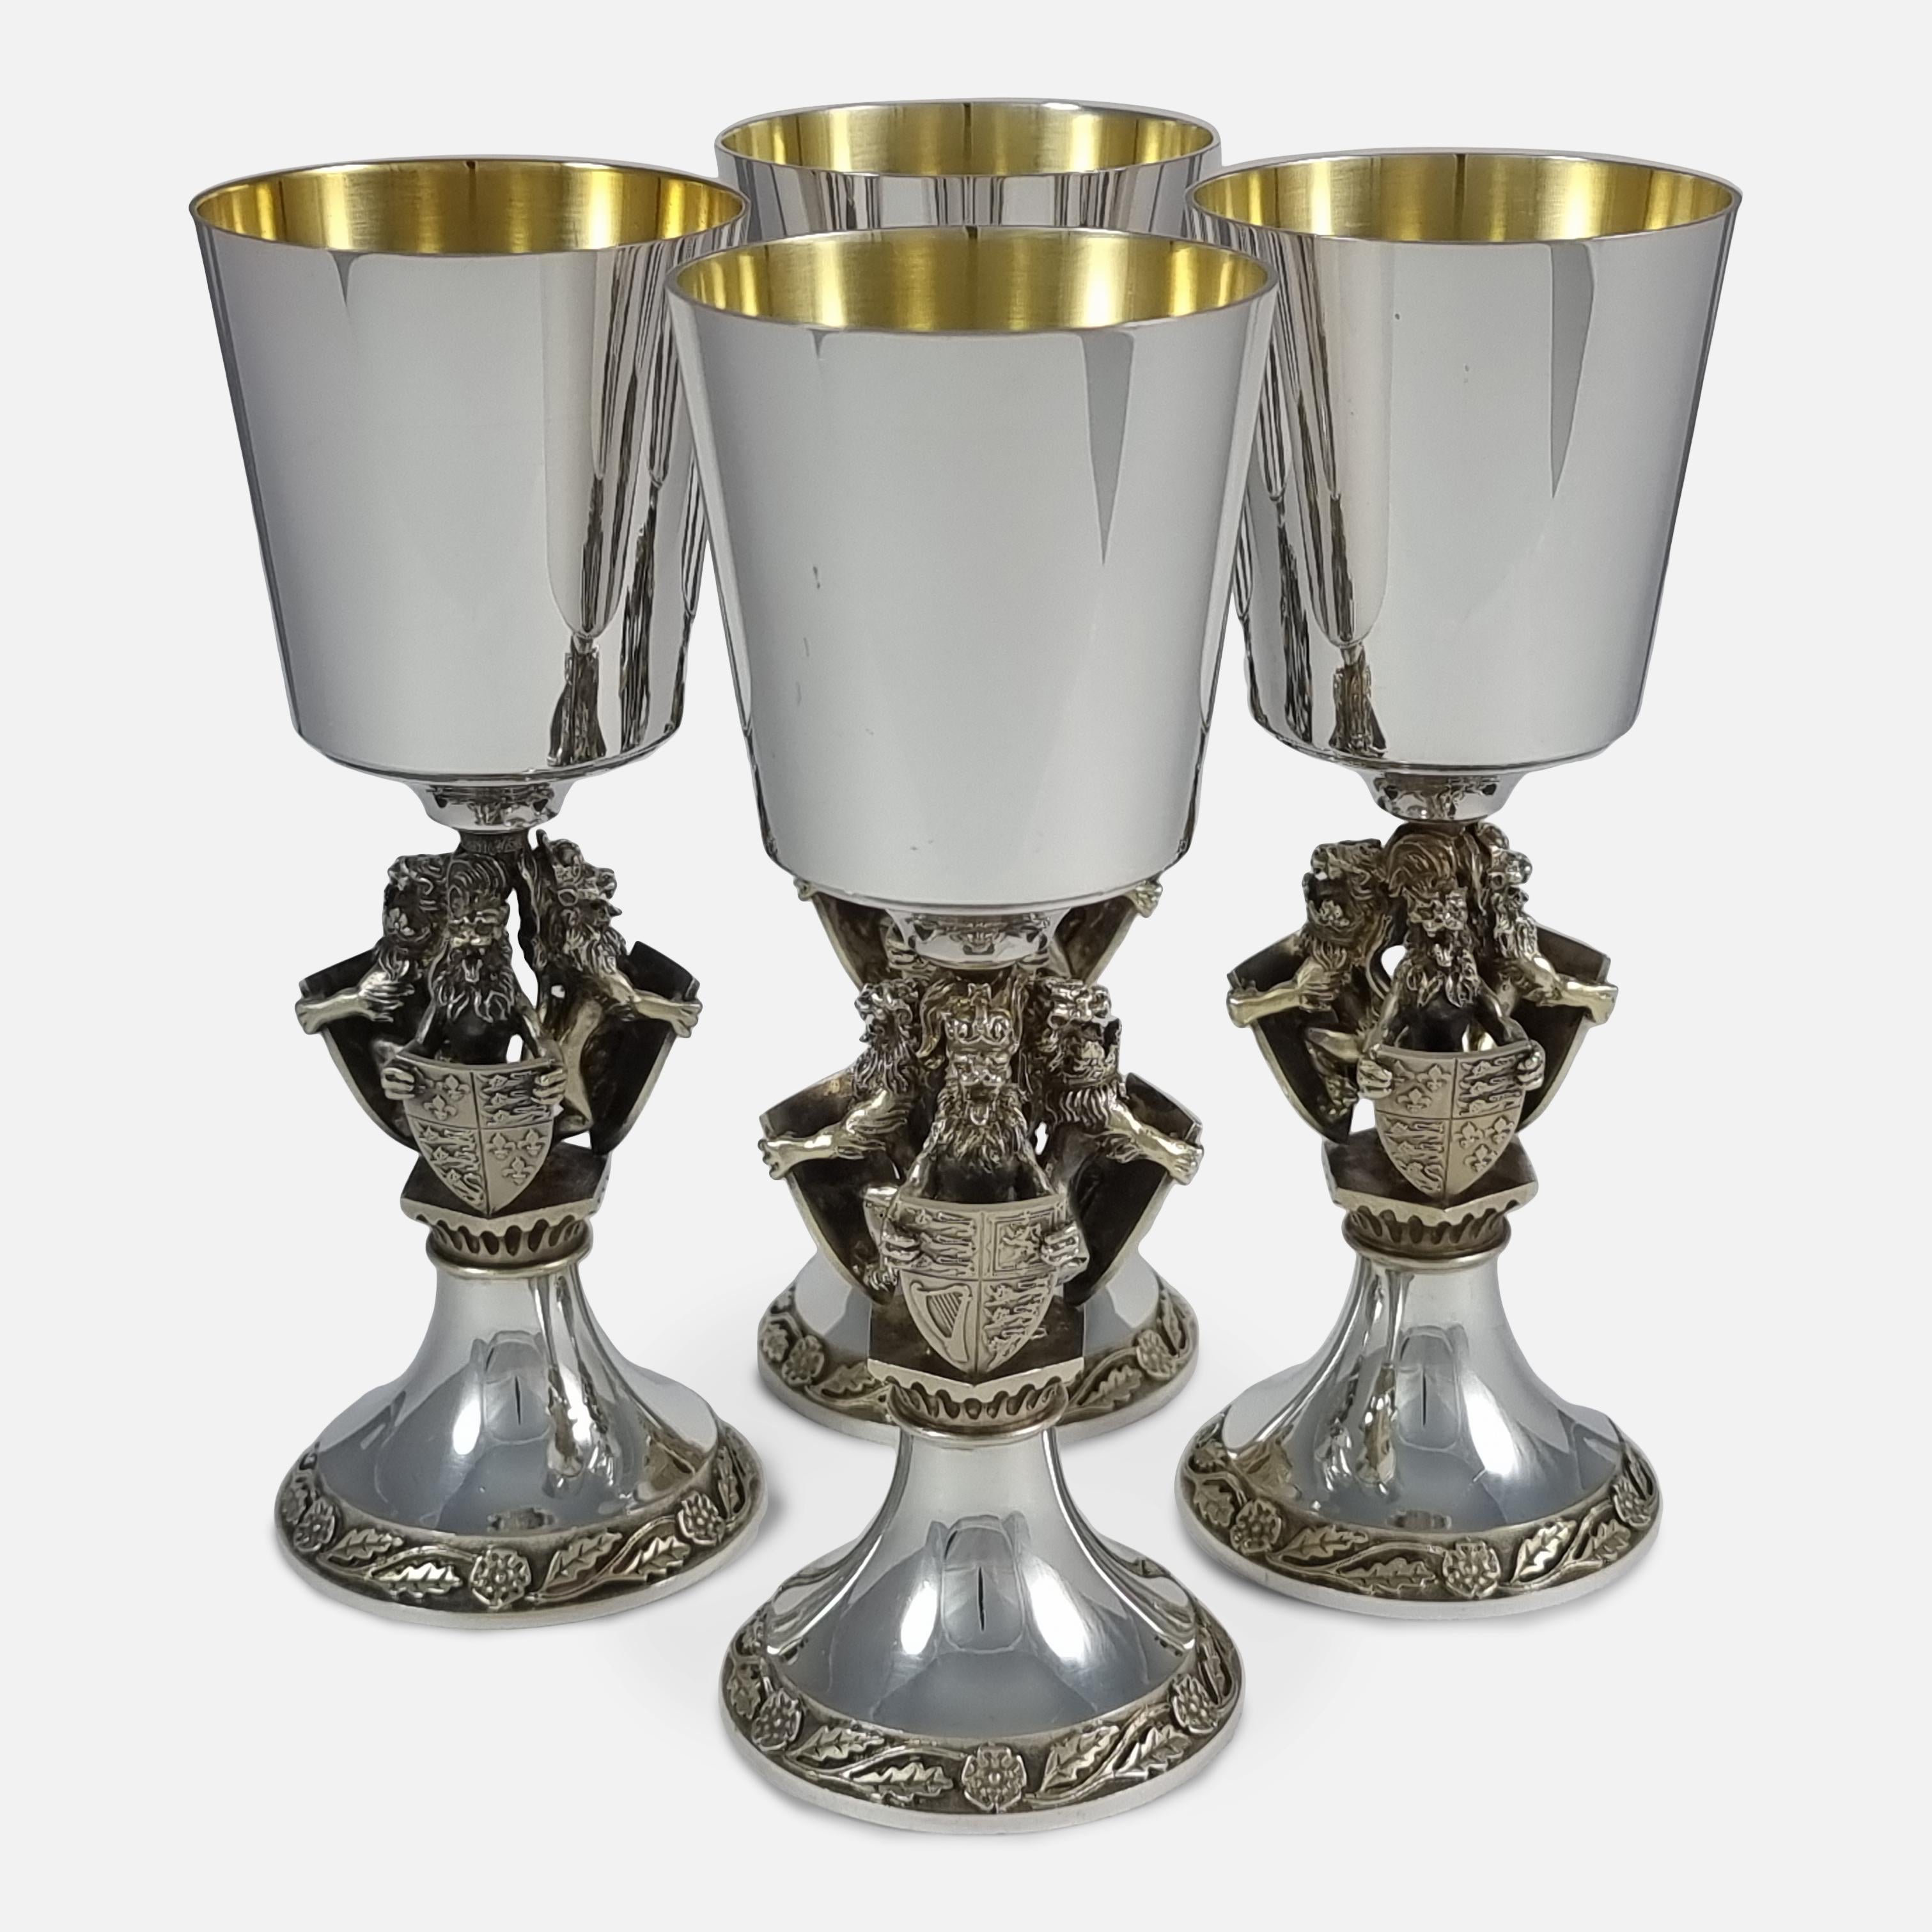 A set of four Parcel-Gilt Sterling Silver Goblets, by Hector Miller for Aurum, London, 1984. The goblets are numbered 33, 34, 36, and 364, from a limited edition of 500. The goblets are each crafted with a plain bowl above a stem with three heraldic